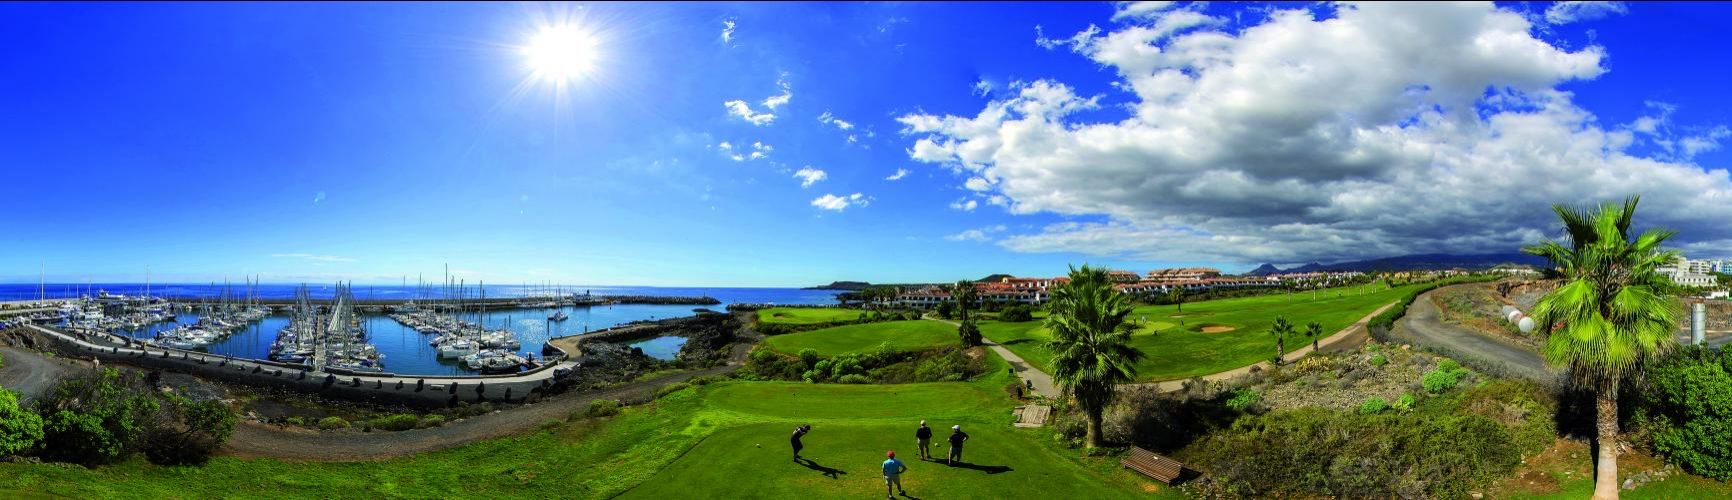 Beautiful wide-angle view of Amarilla golf course on Tenerife